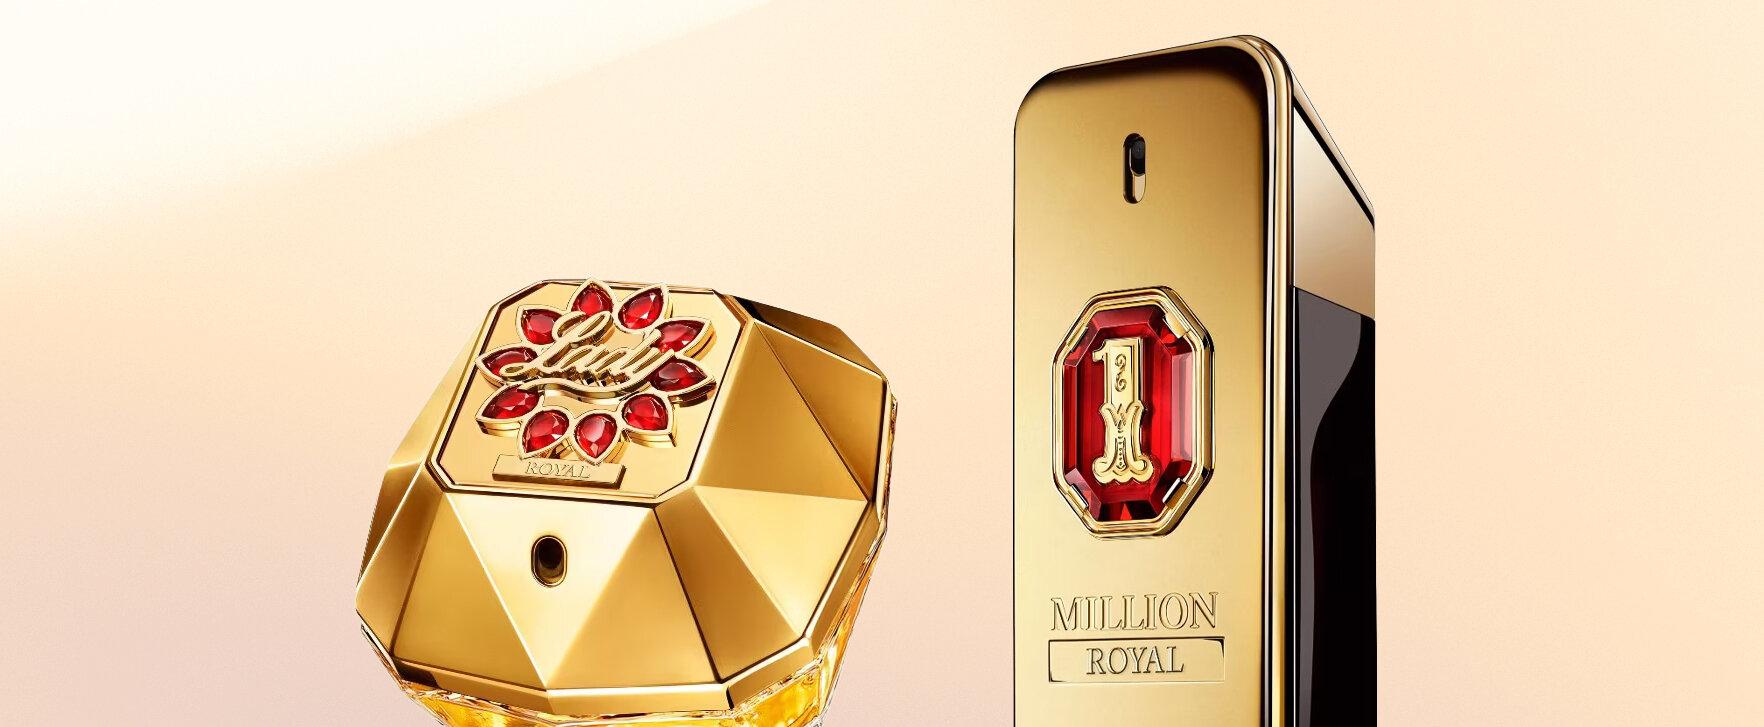 Paco Rabanne Celebrates 15 Years of One Million With "Lady Million Royal" and "1 Million Royal"